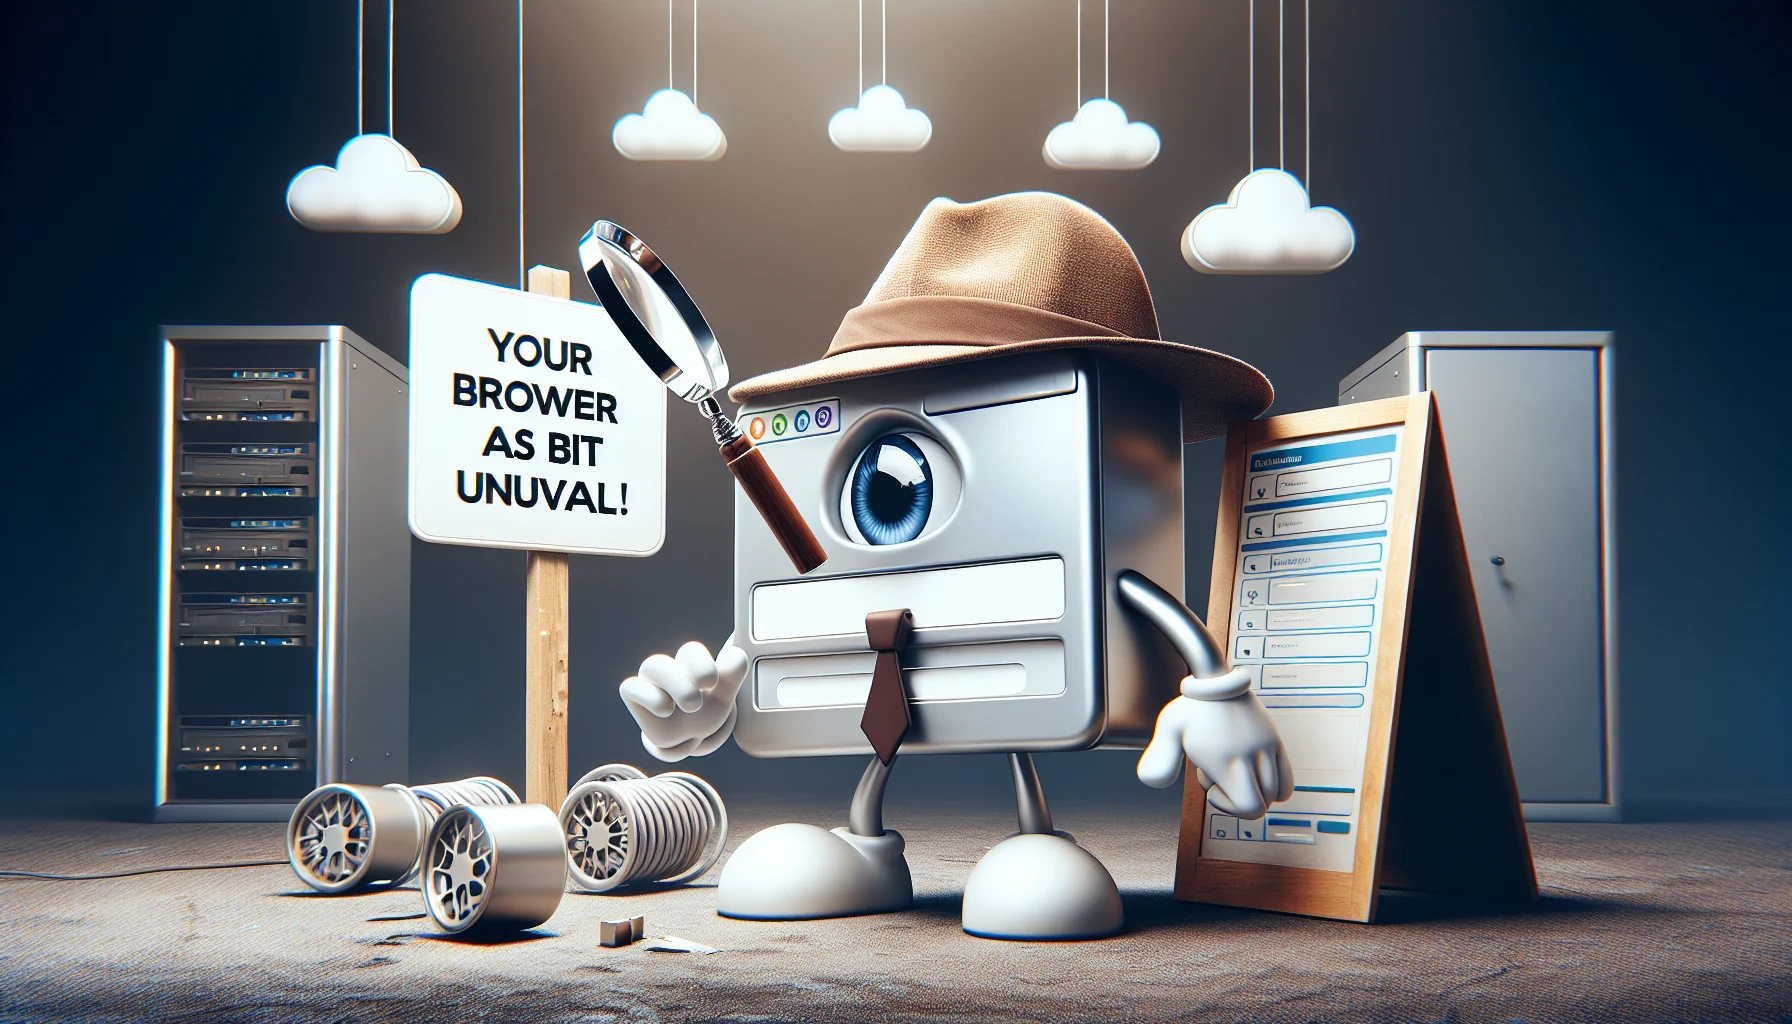 Generate a humorous, realistic image showing an anthropomorphized web browser character wearing a detective hat, magnifying glass in hand, investigating a signboard that reads 